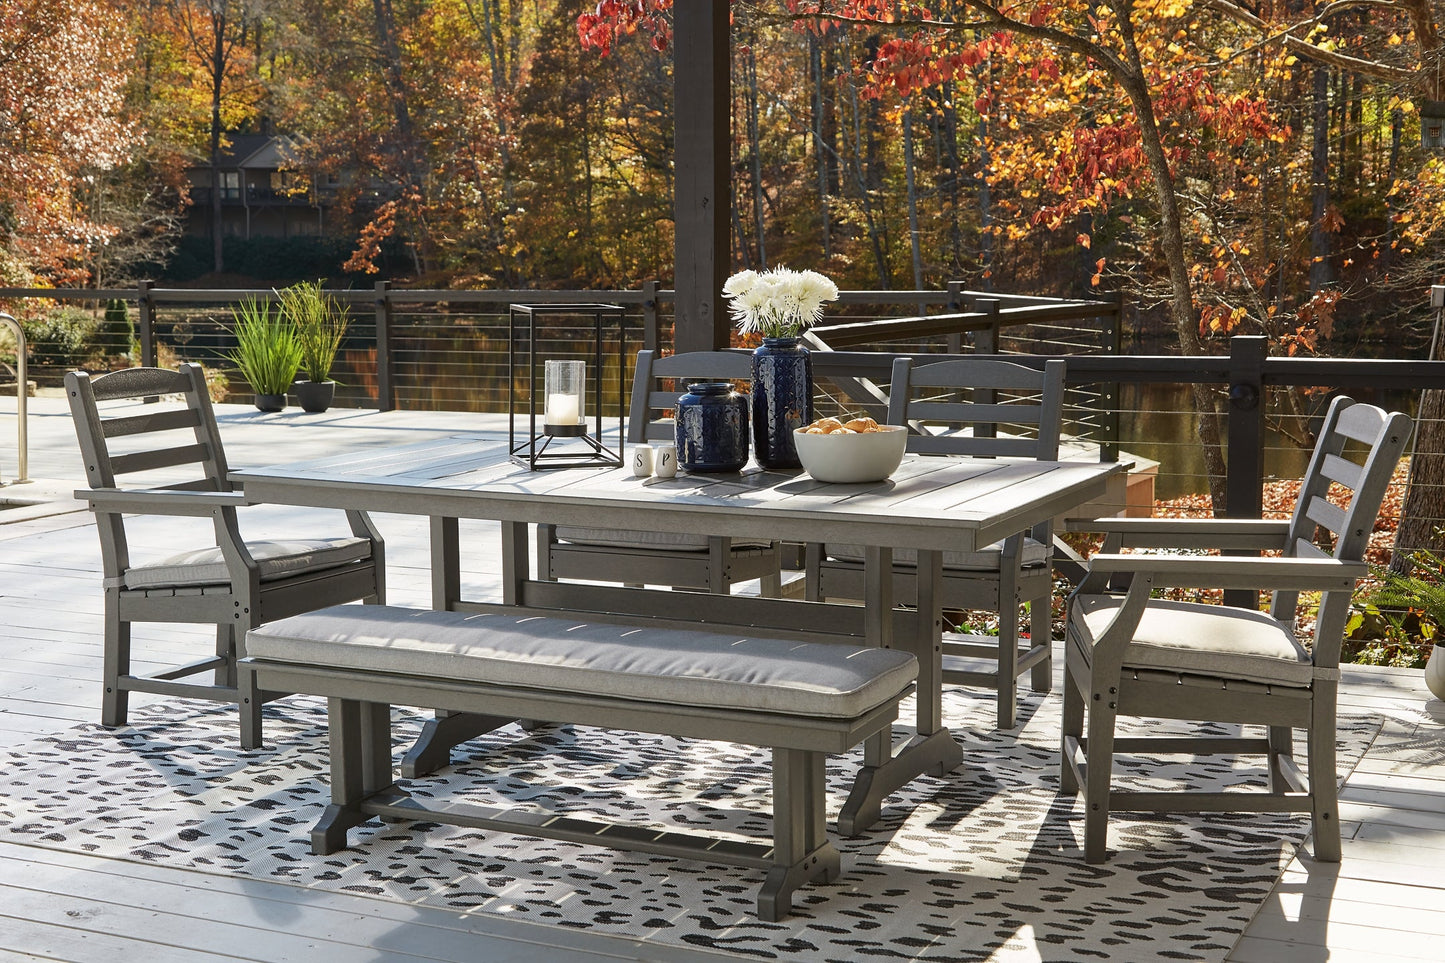 Visola Outdoor Dining Table and 4 Chairs and Bench at Walker Mattress and Furniture Locations in Cedar Park and Belton TX.